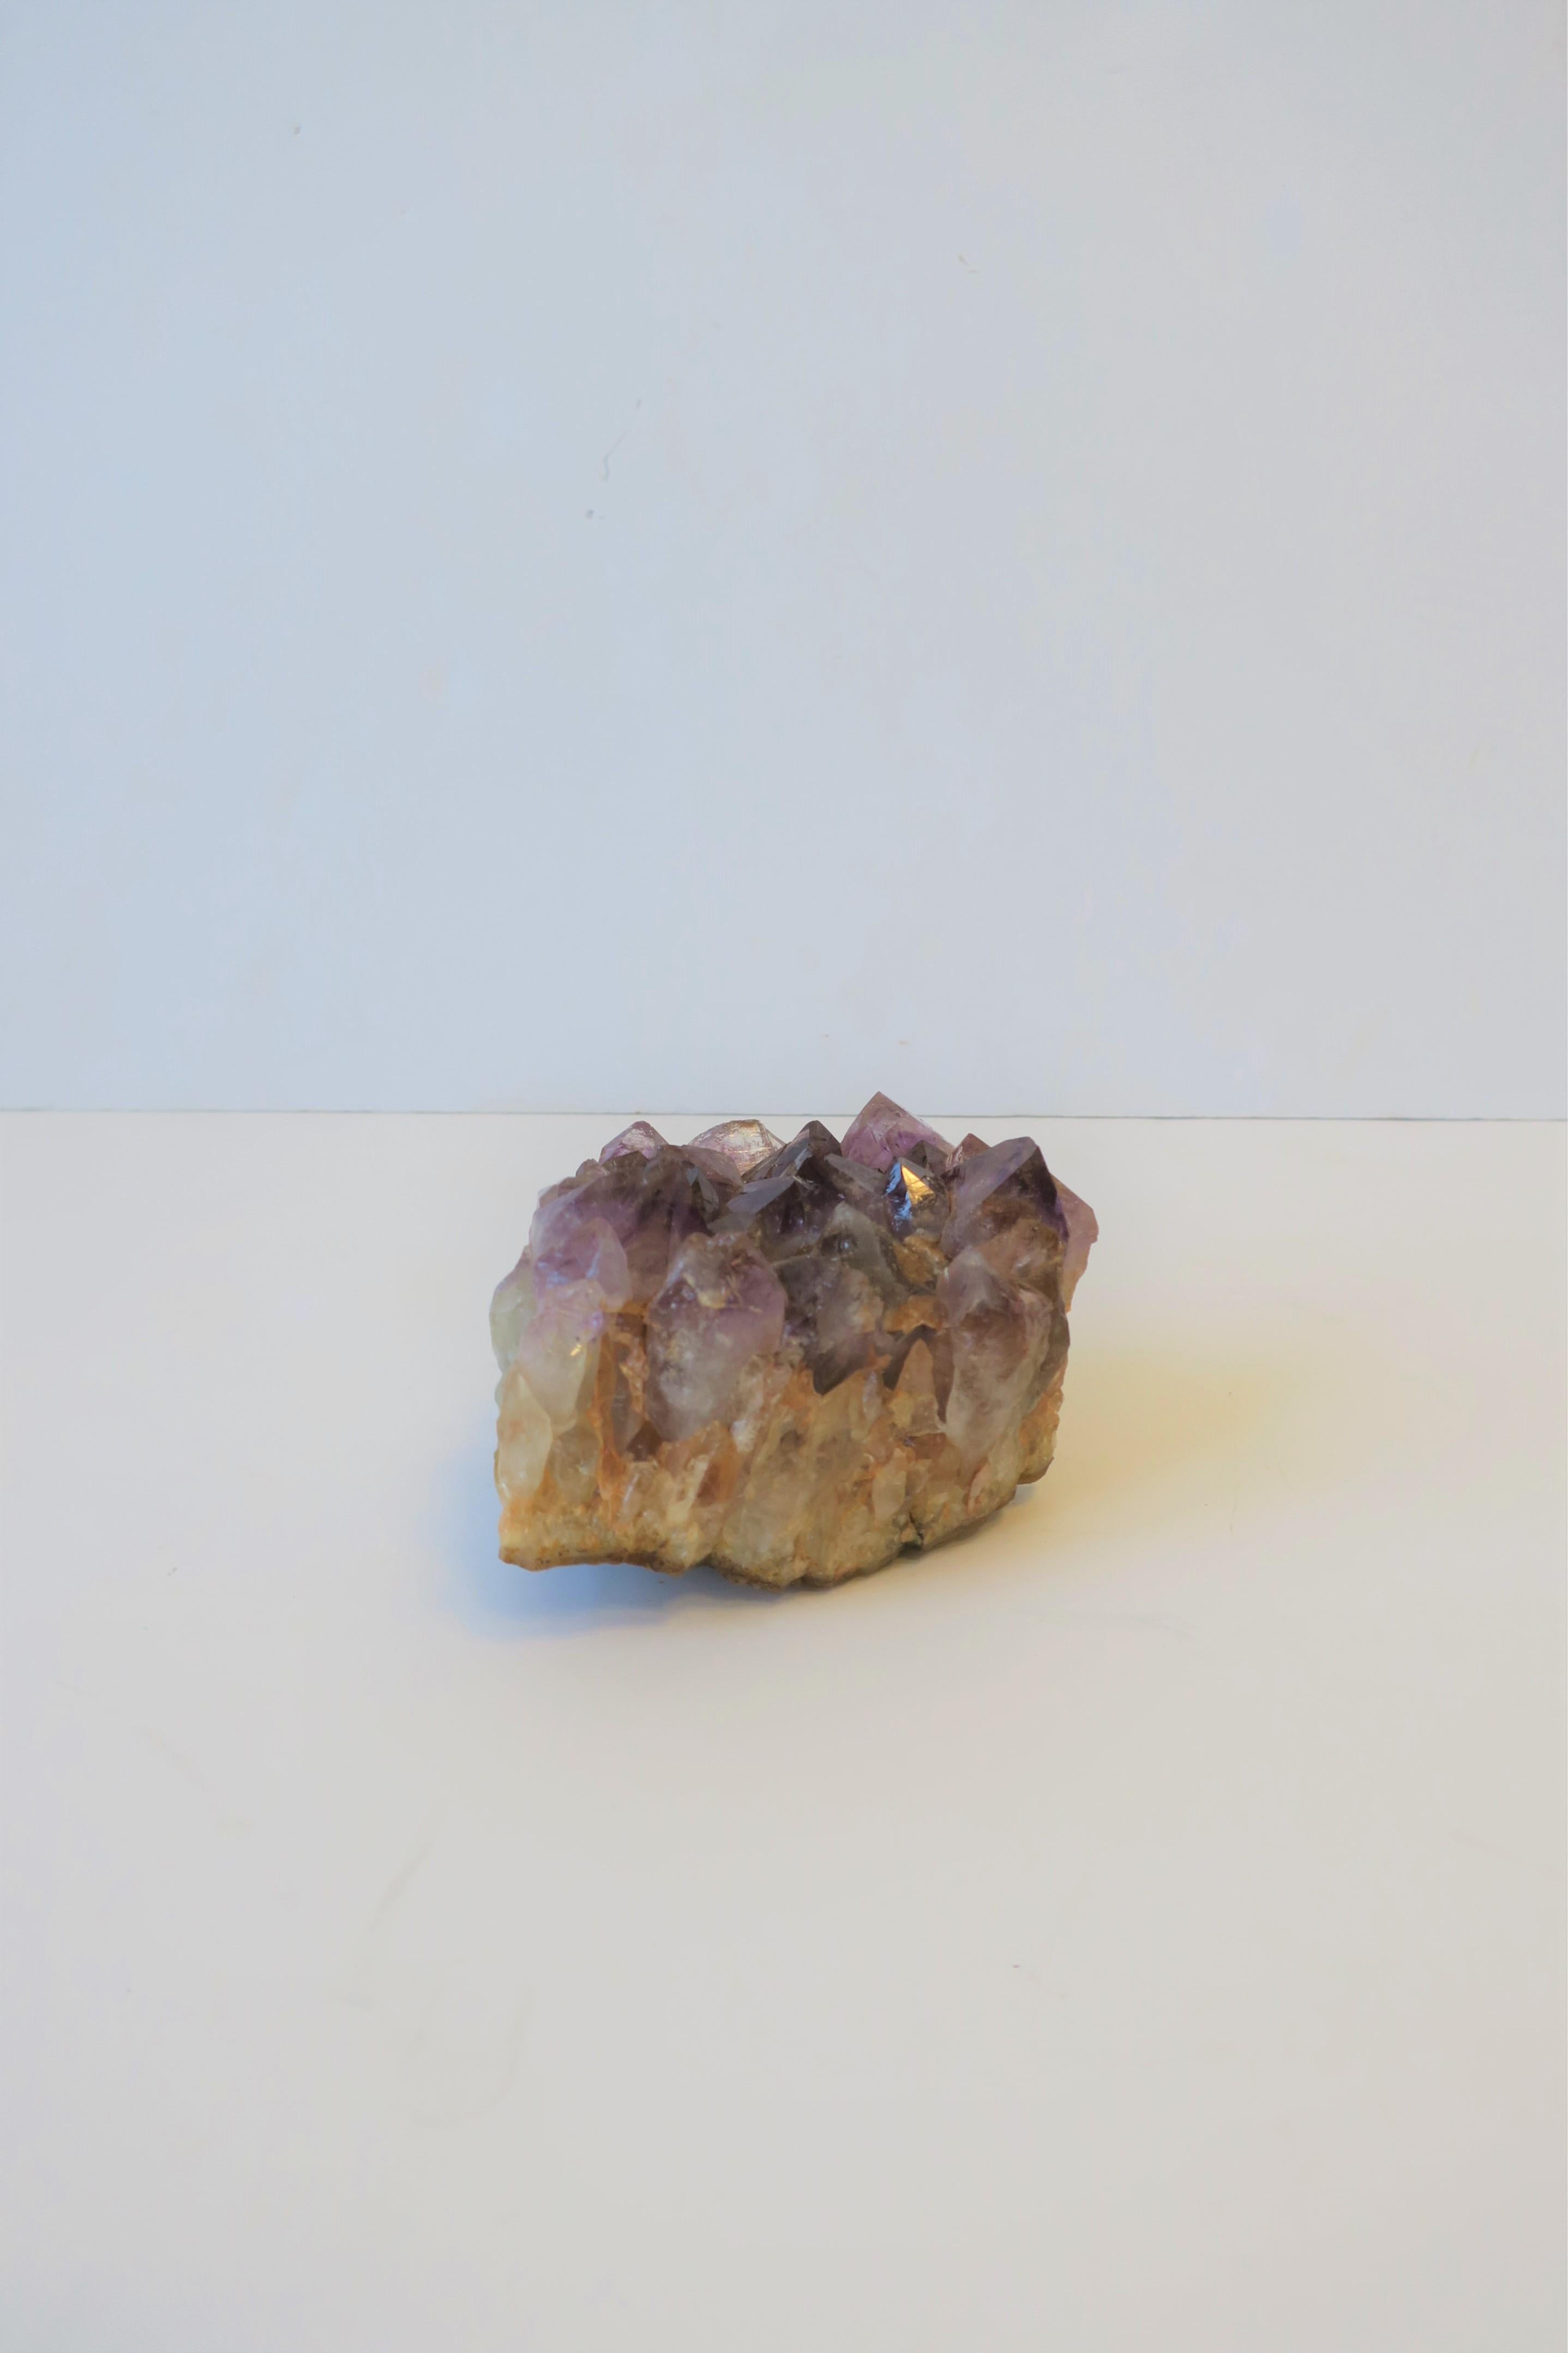 Purple Amethyst Natural Specimen Decorative Object or Paperweight 3